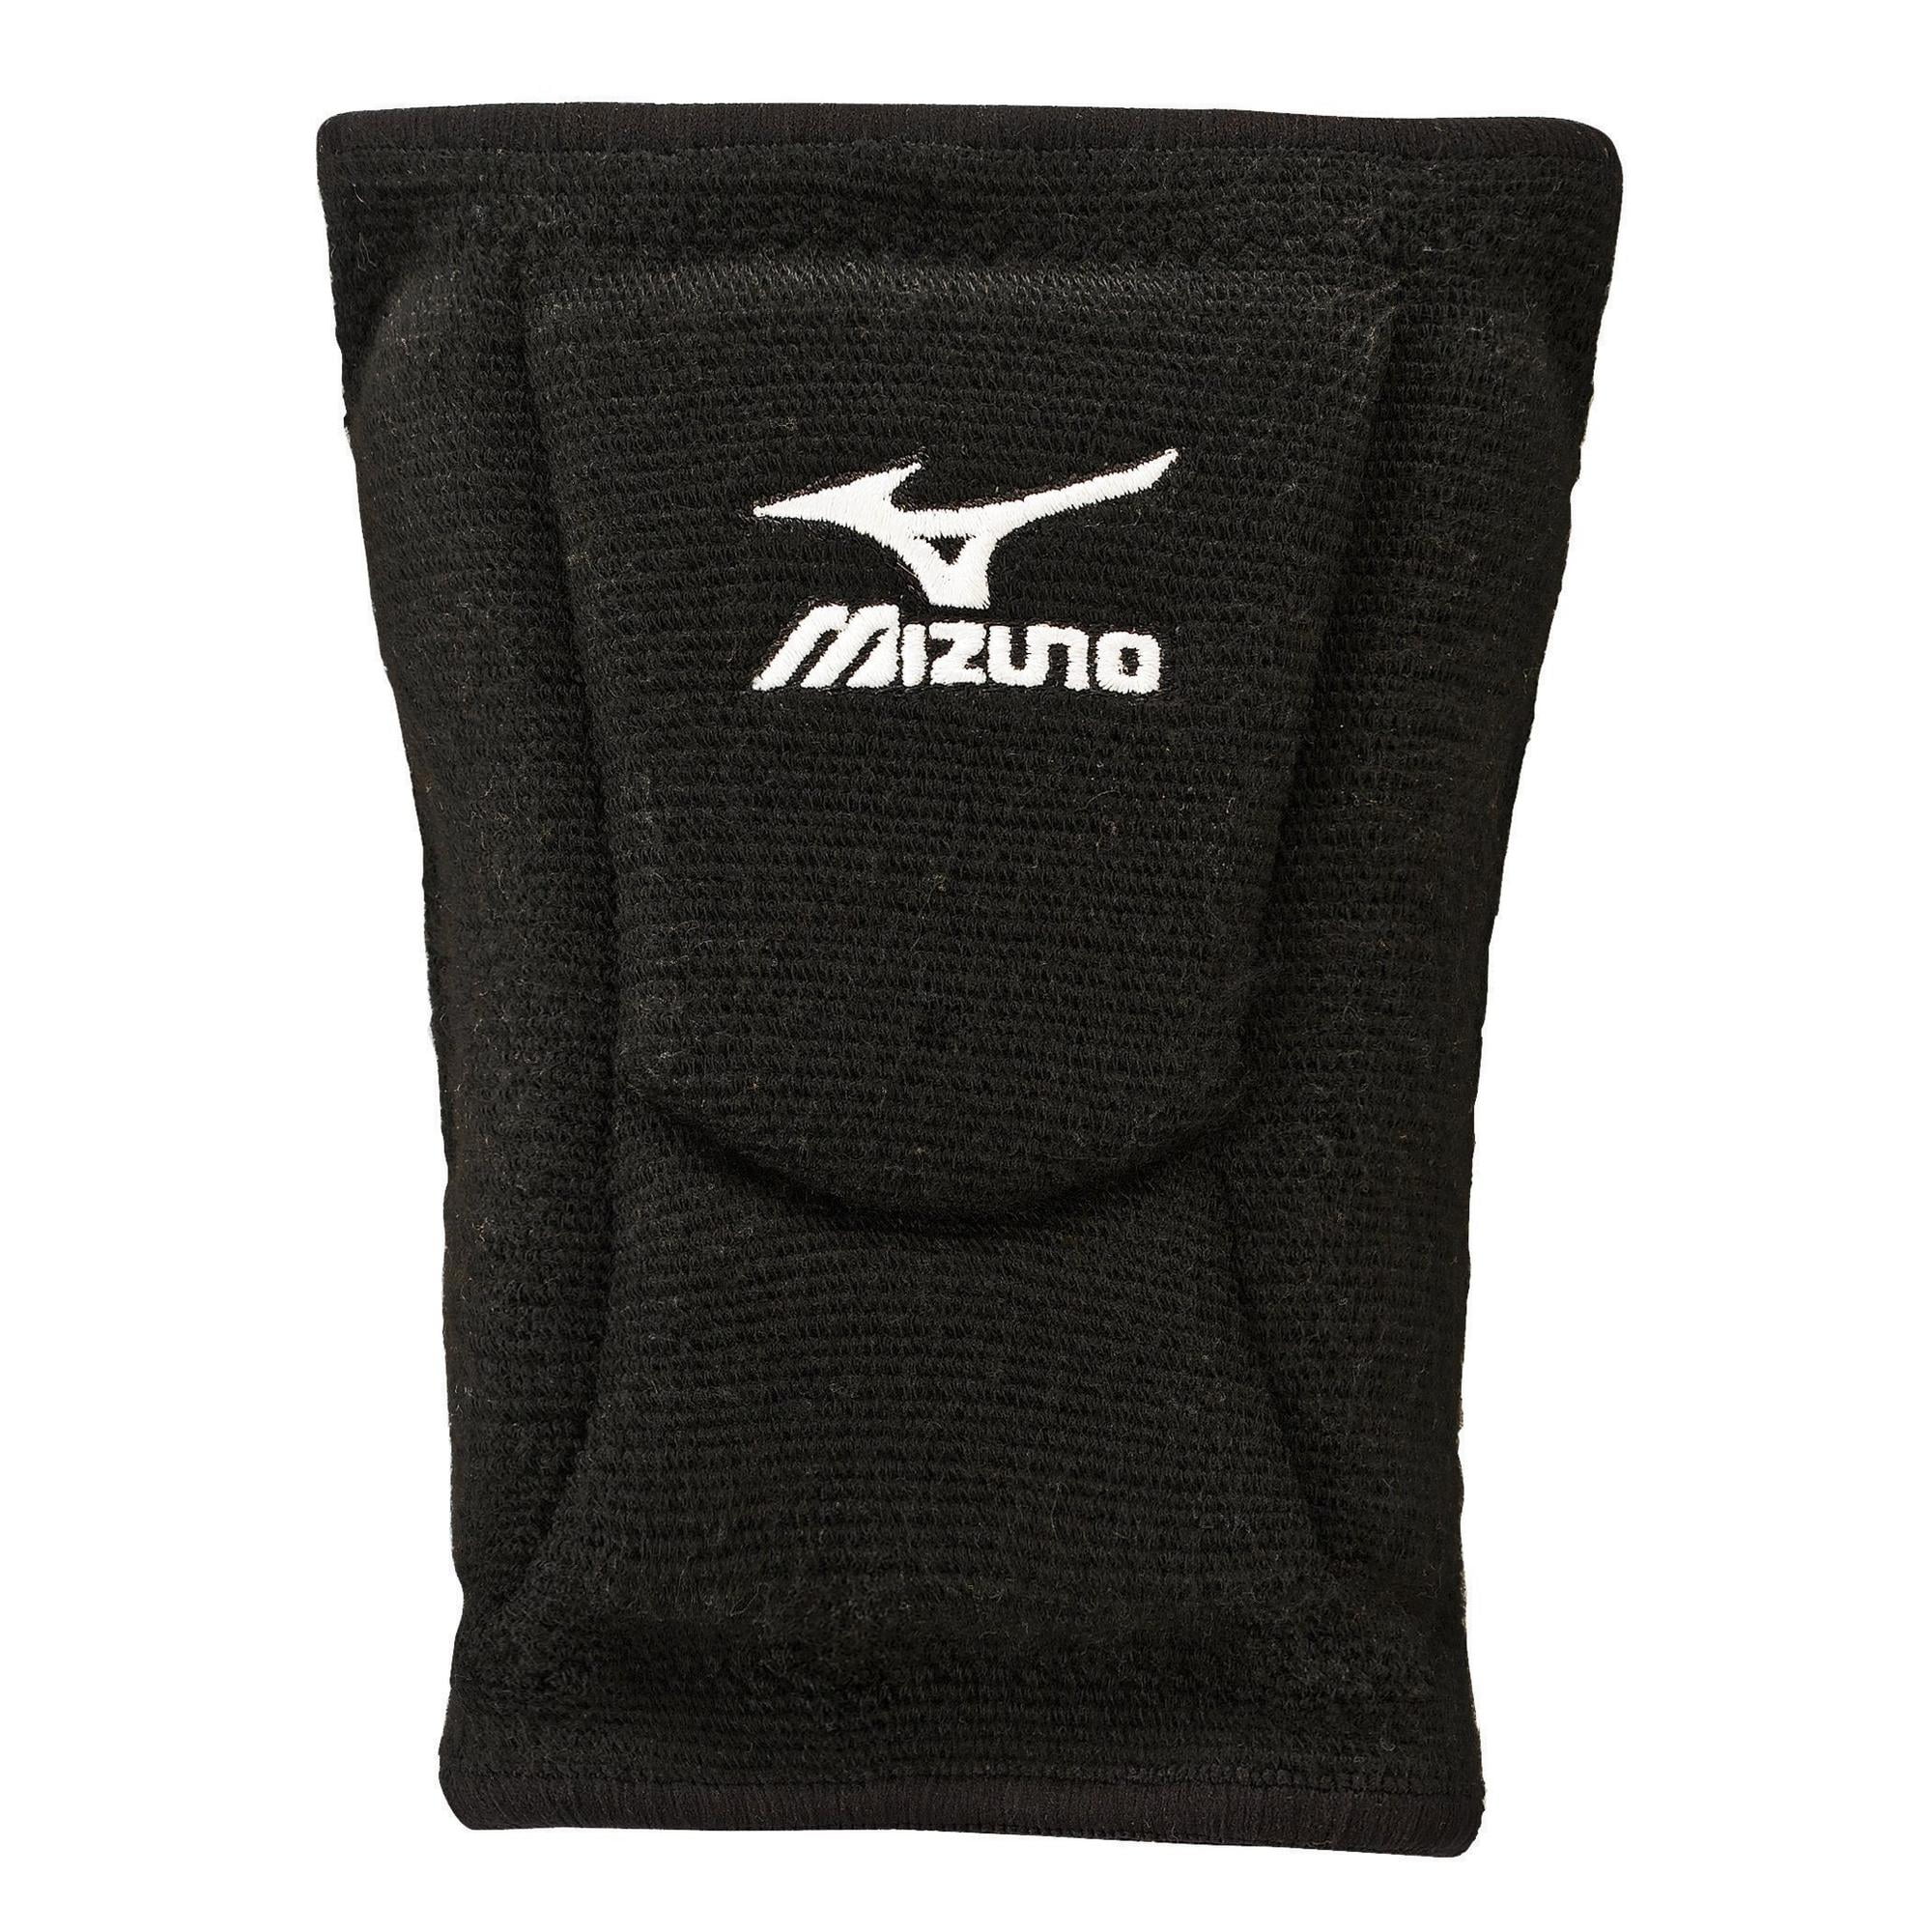 Mizuno VS-1 Volleyball Kneepads Knee Pads White 9” Sleeve Length Size Large 